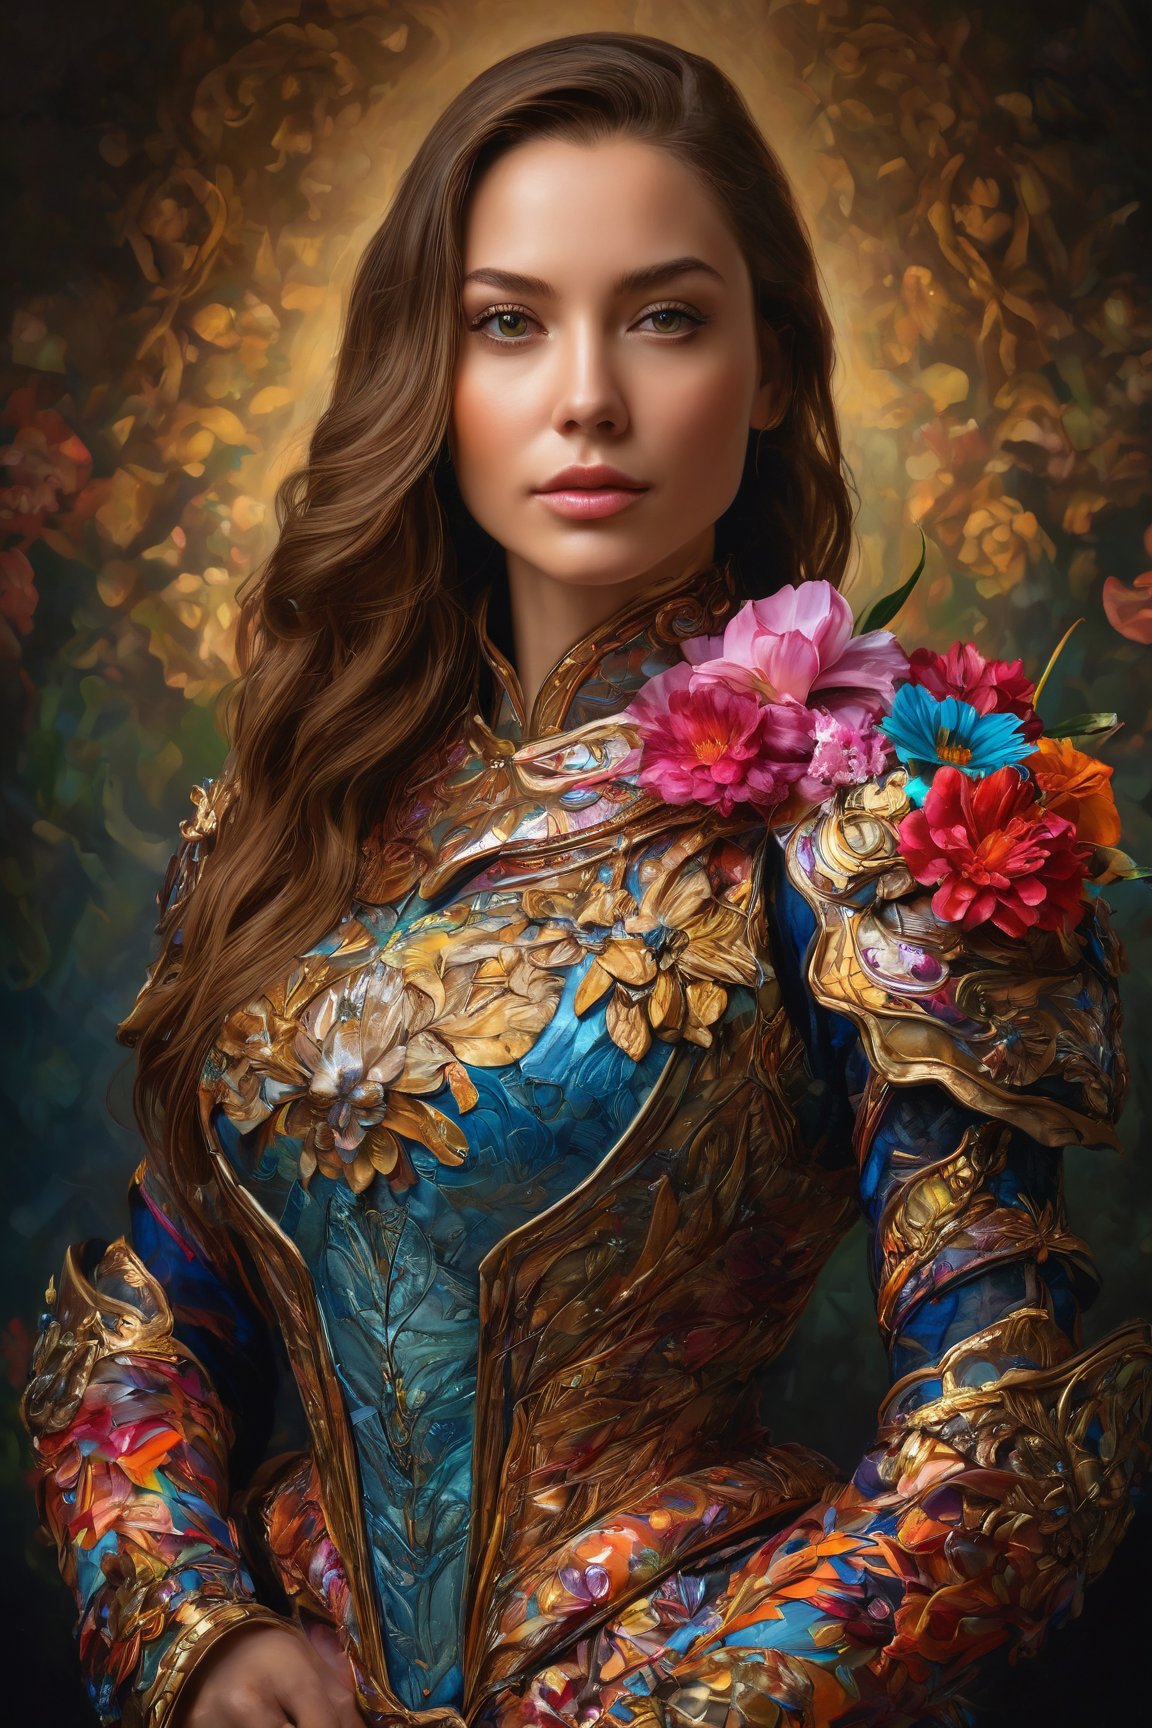 (best quality,  realistic,  high-resolution),  colorful portrait of a woman with flawless anatomy. She is wearing a stunning flower dress that compliments her vibrant personality. Her skin is extremely detailed and realistic,  with a natural and lifelike texture. The background is dark,  which creates a striking contrast to the colorful flowers adorning her armor. The flowers on her armor represent her strength and beauty. The lighting accentuates the contours of her face,  adding depth and dimension to the portrait. The overall composition is masterfully done,  showcasing the intricate details and achieving a high level of realism,  Realistic